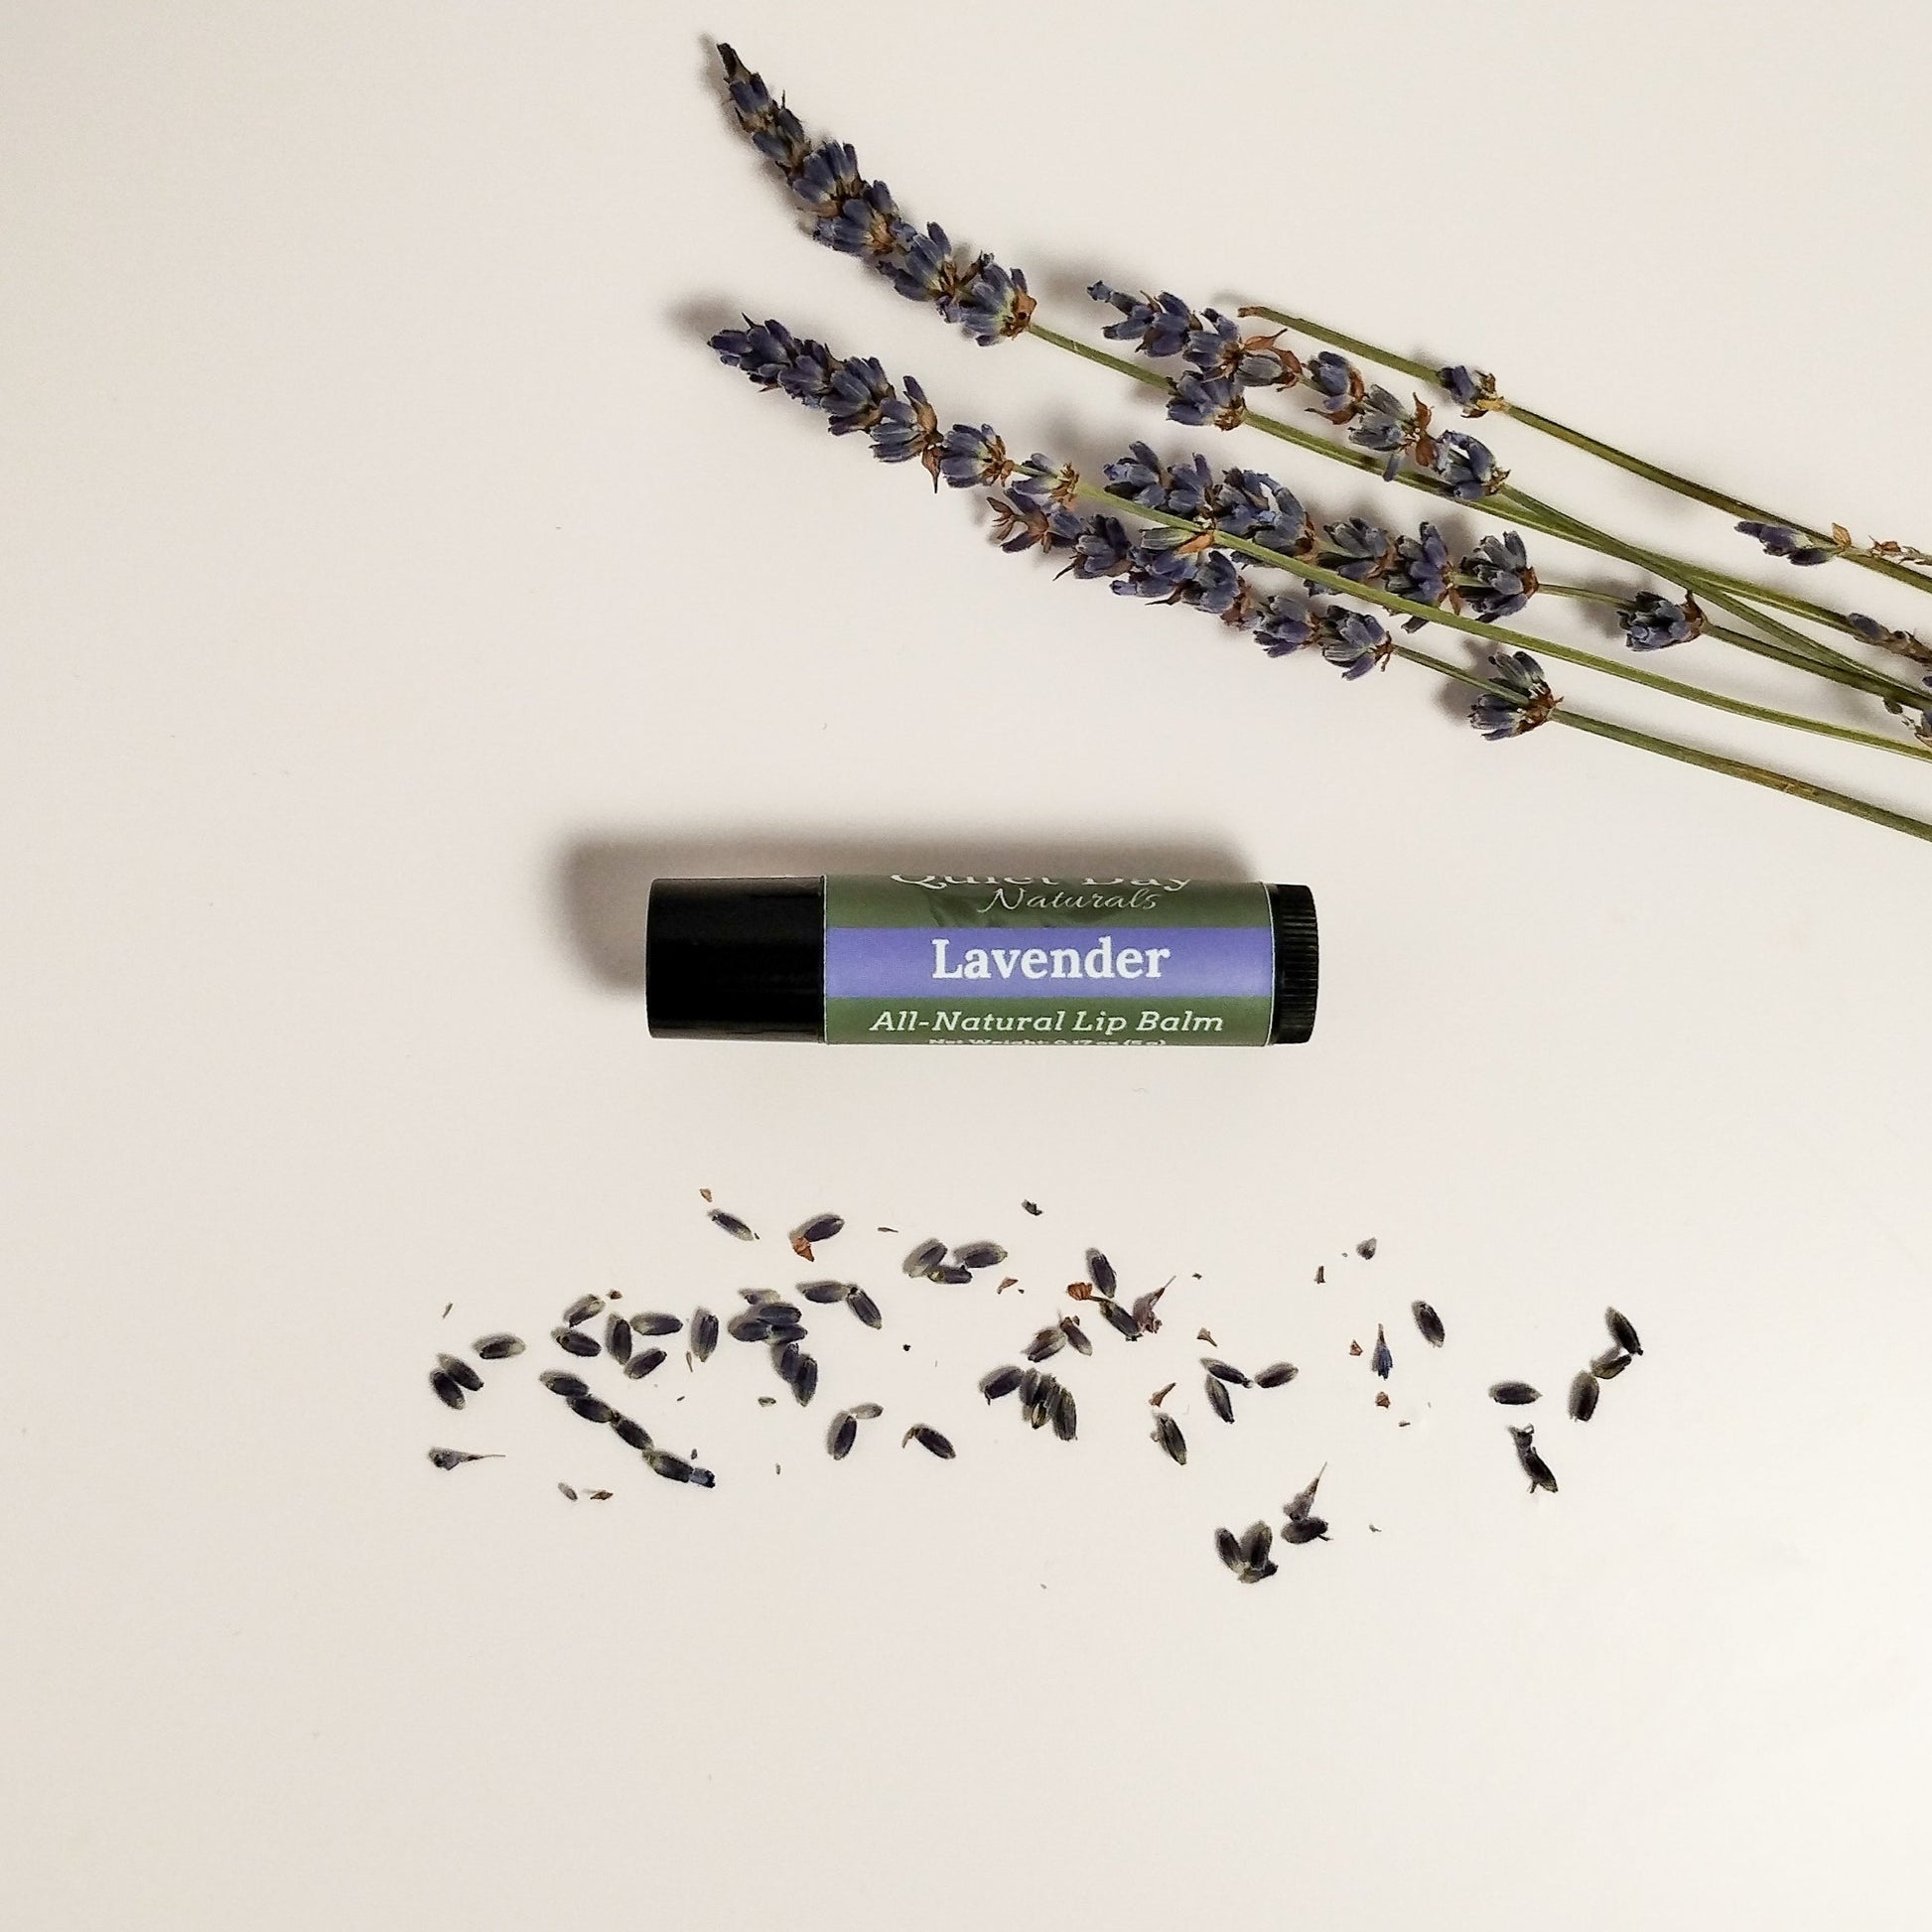 Handmade Natural Lip Balm laying on a white background with lavender buds next to it.